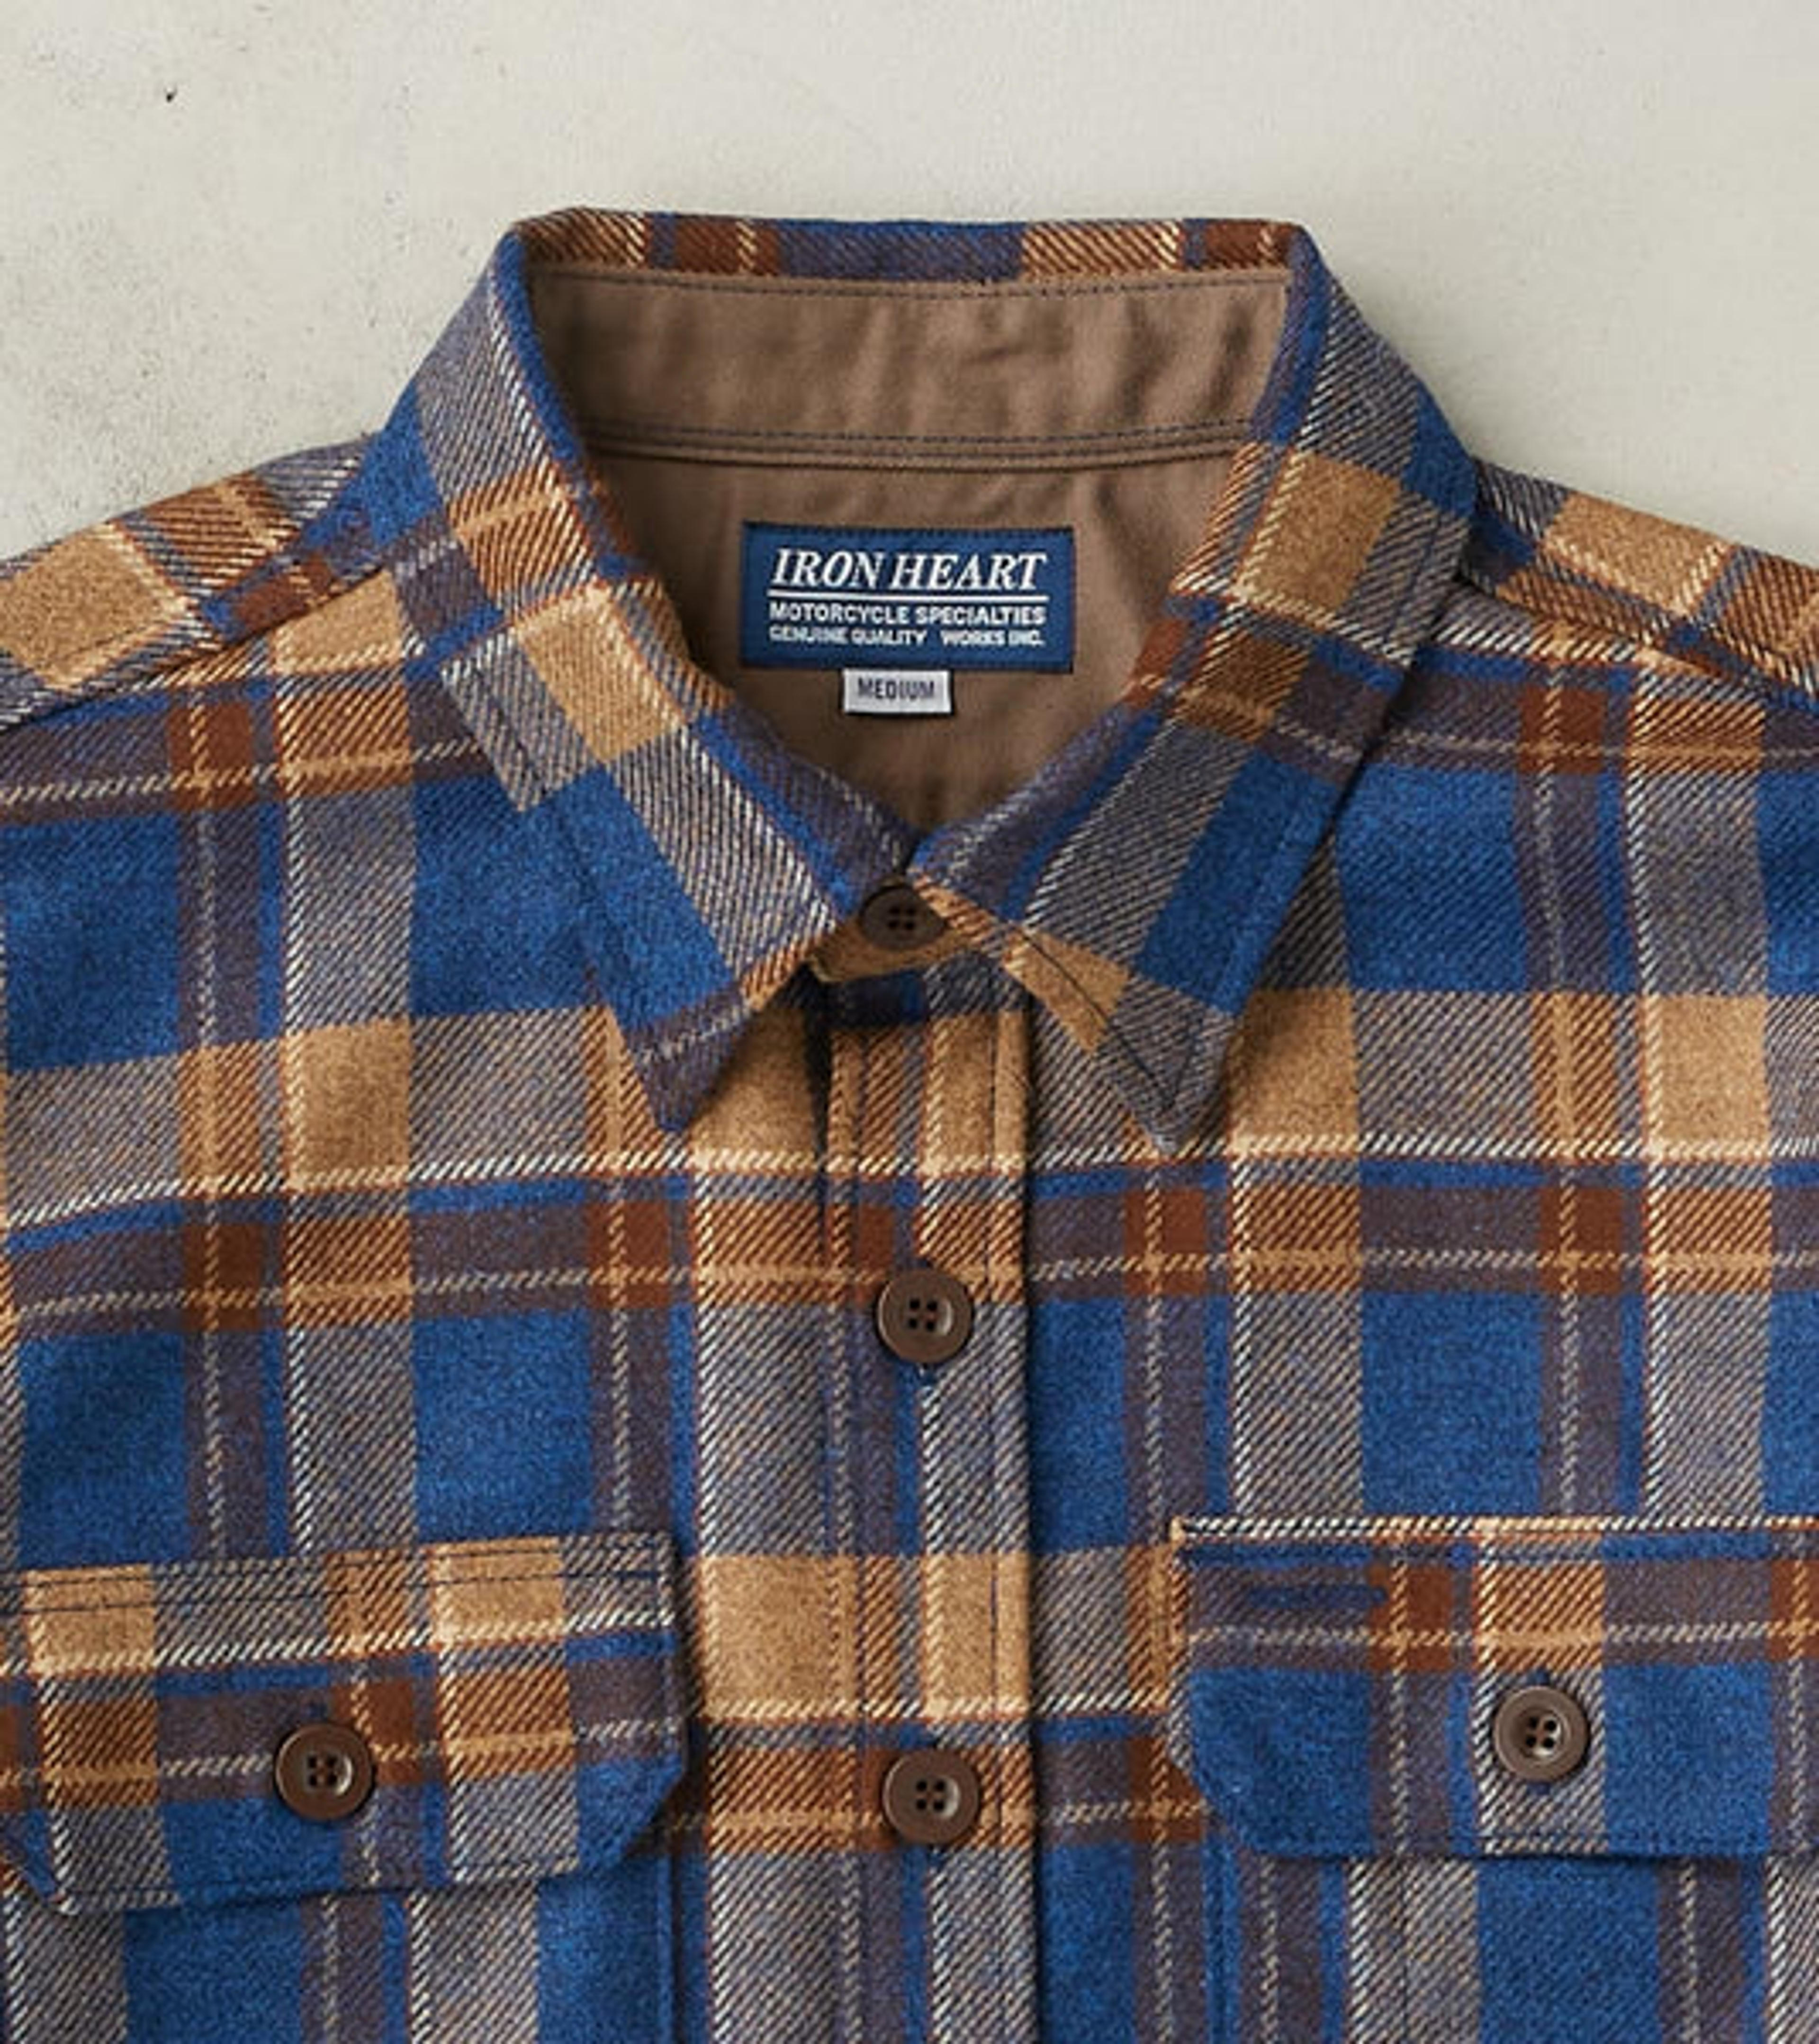 Iron Heart x DR 434-DTC - CPO Shirt - Fox Brothers® Wool Devon Twill Check Flannel – Division Road, Inc.